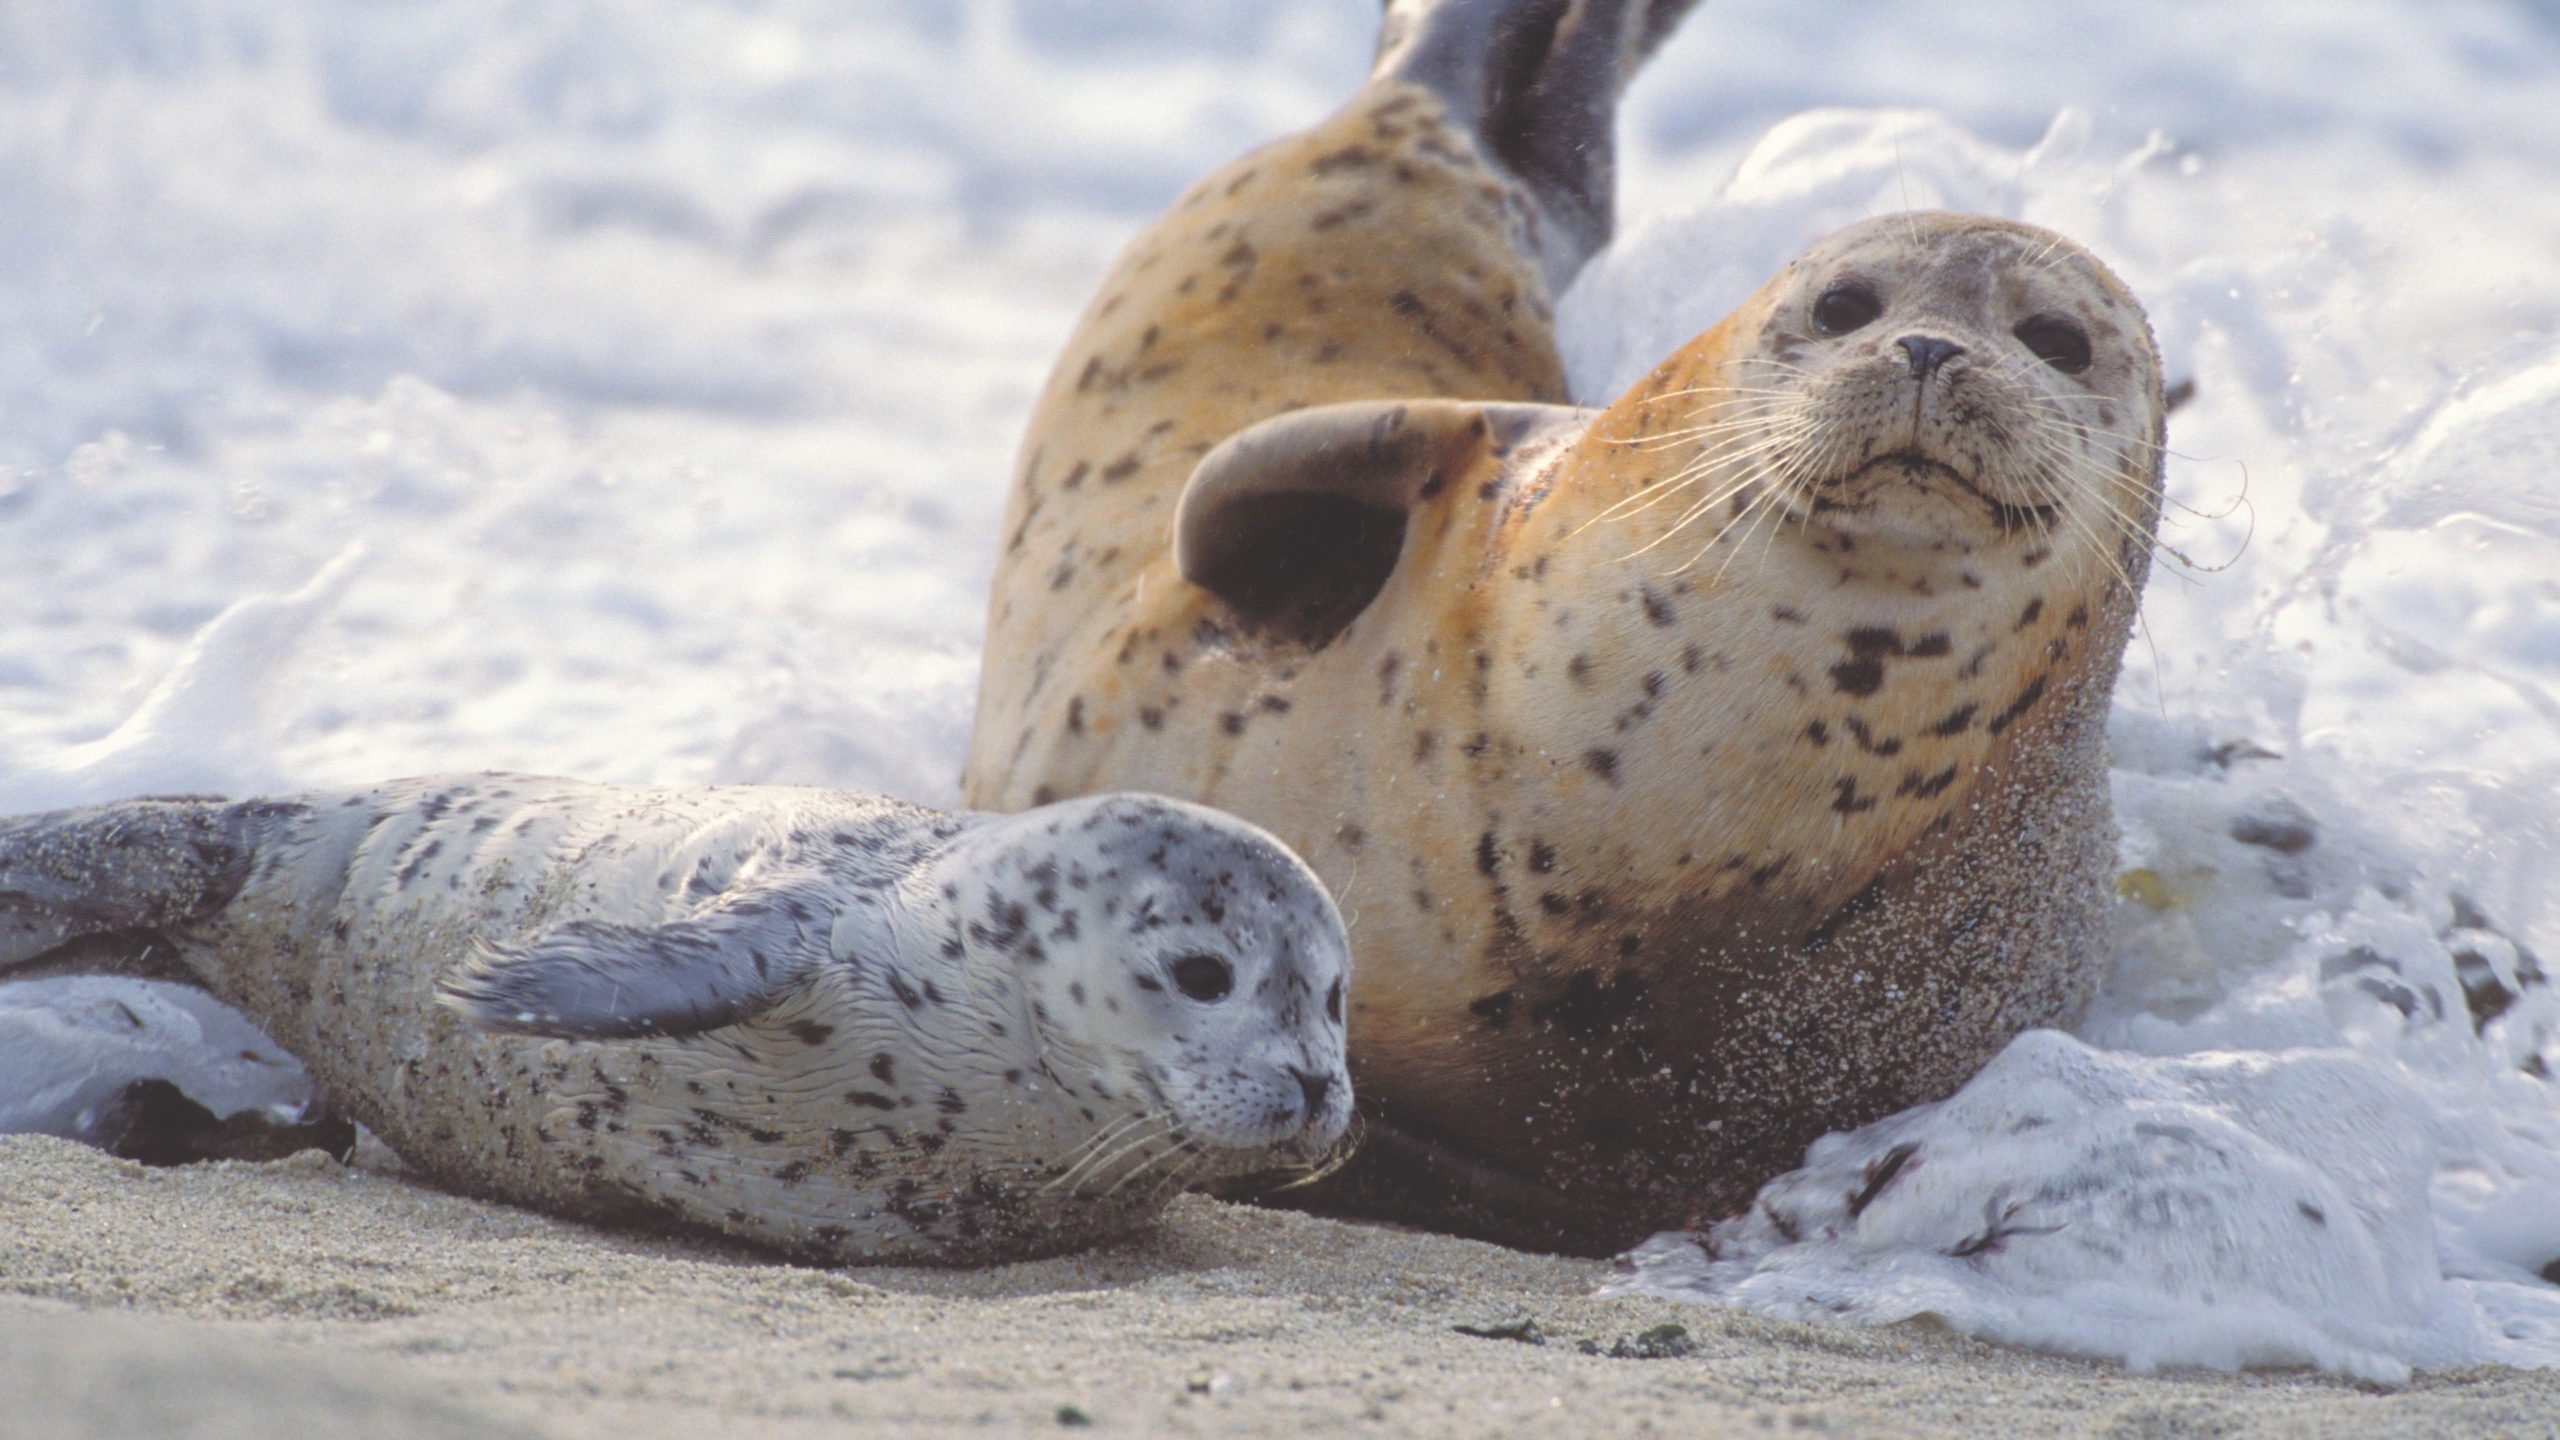 According to Eszterhas, harbour seals are not habituated to humans and are quite shy. She had to practice stealth photography to shoot them. (Photo: Suzi Eszterhas/New On Earth: Baby Animals in the Wild/courtesy of Earth Aware Editions)